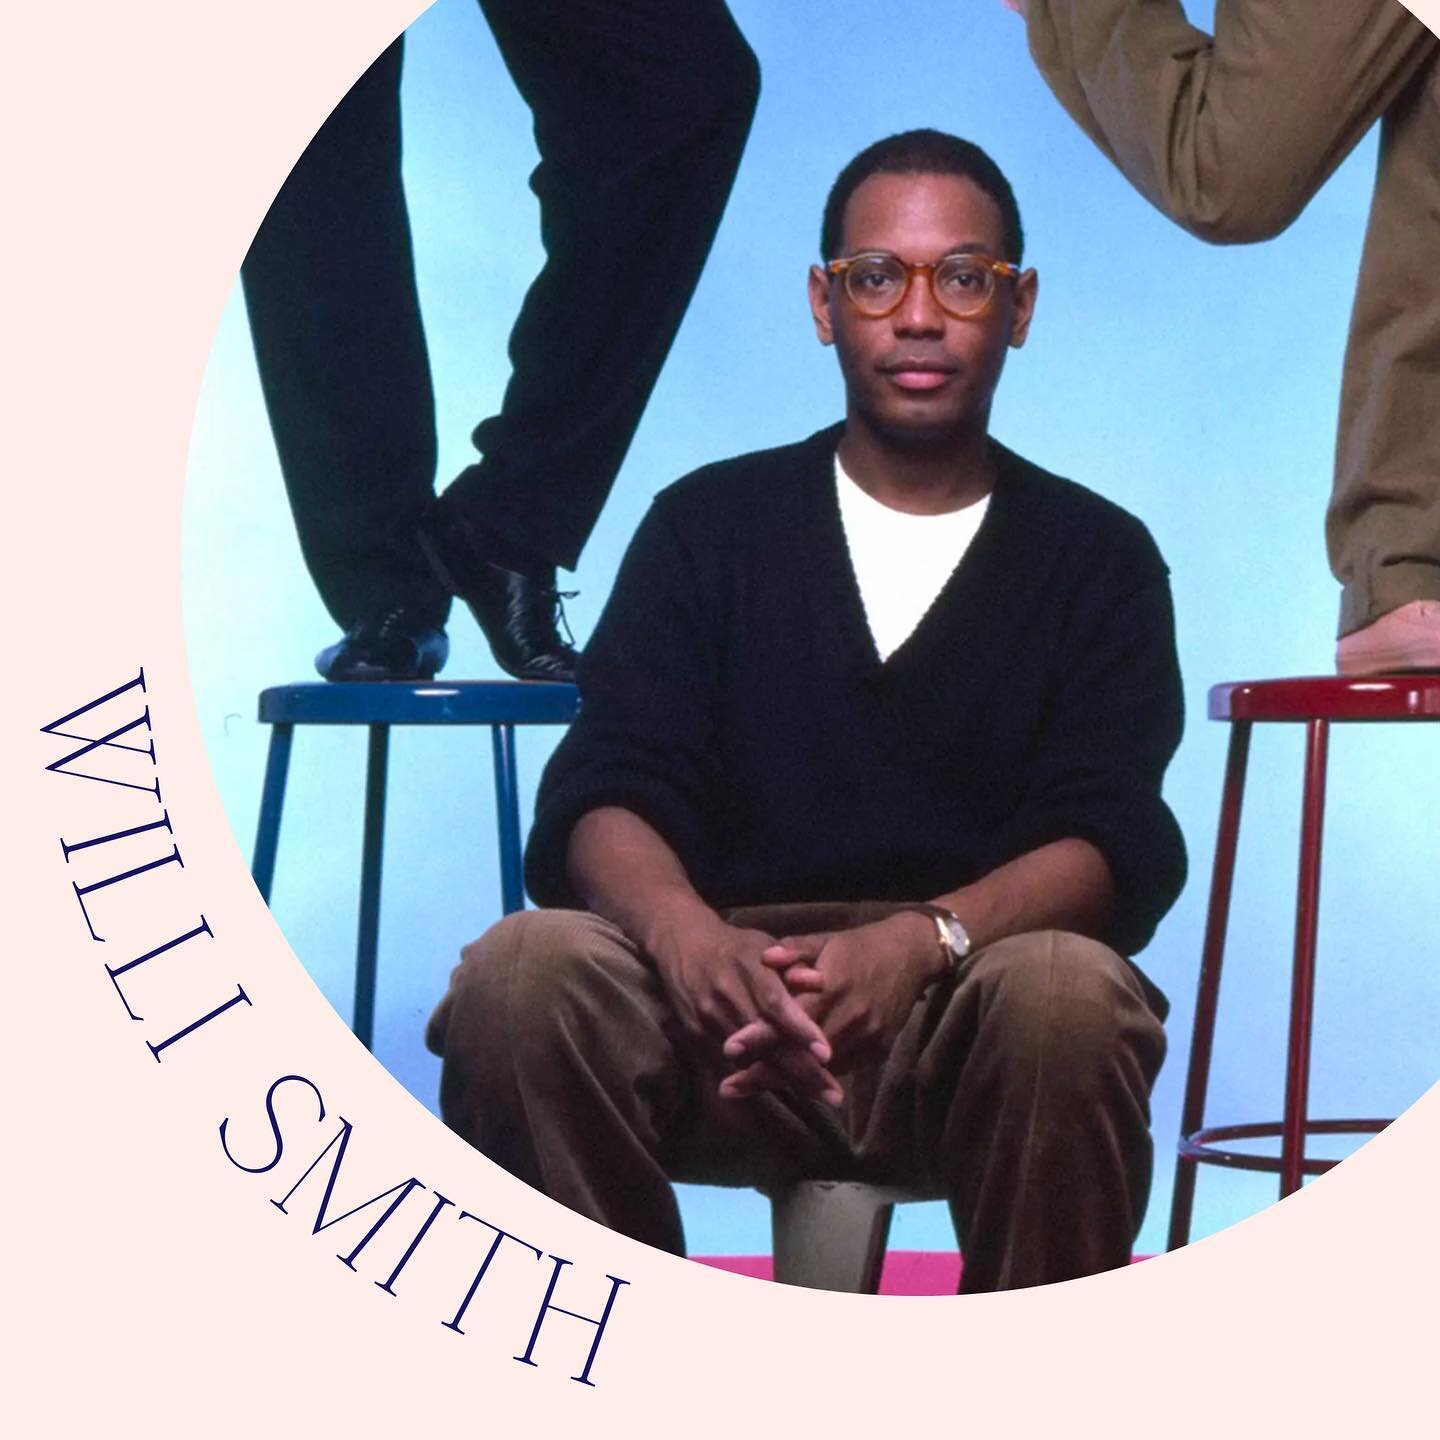 Next up in our historical Black designer series is Willi Smith, the OG streetwear innovator working with the likes of Keith Haring and Alvin Ailey! 💃